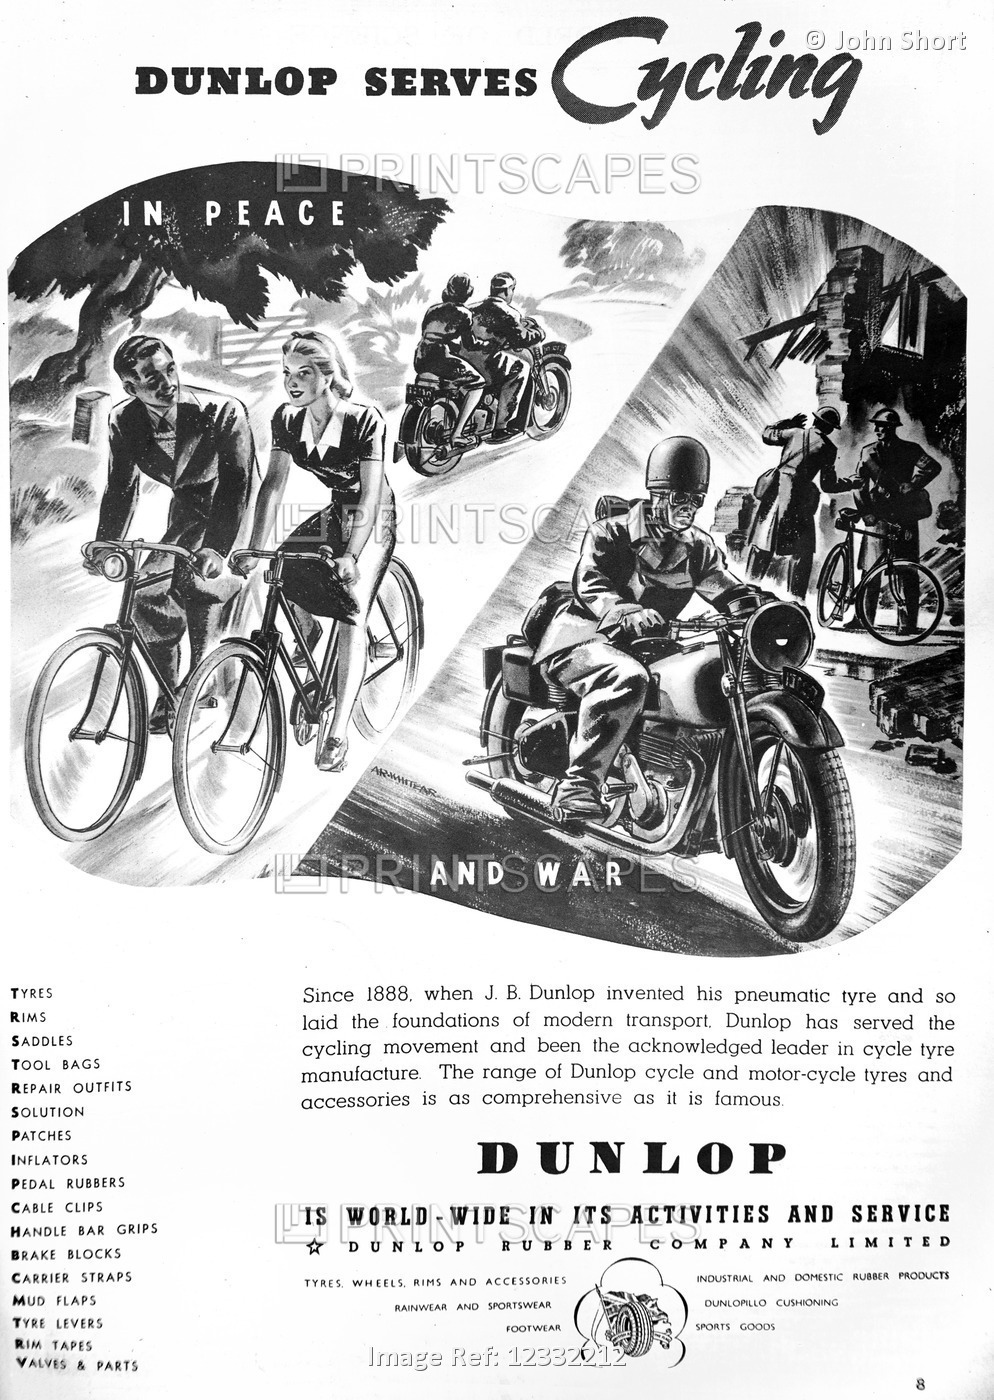 The Illustrated London News 1941. Dunlop Rubber Company advertisement